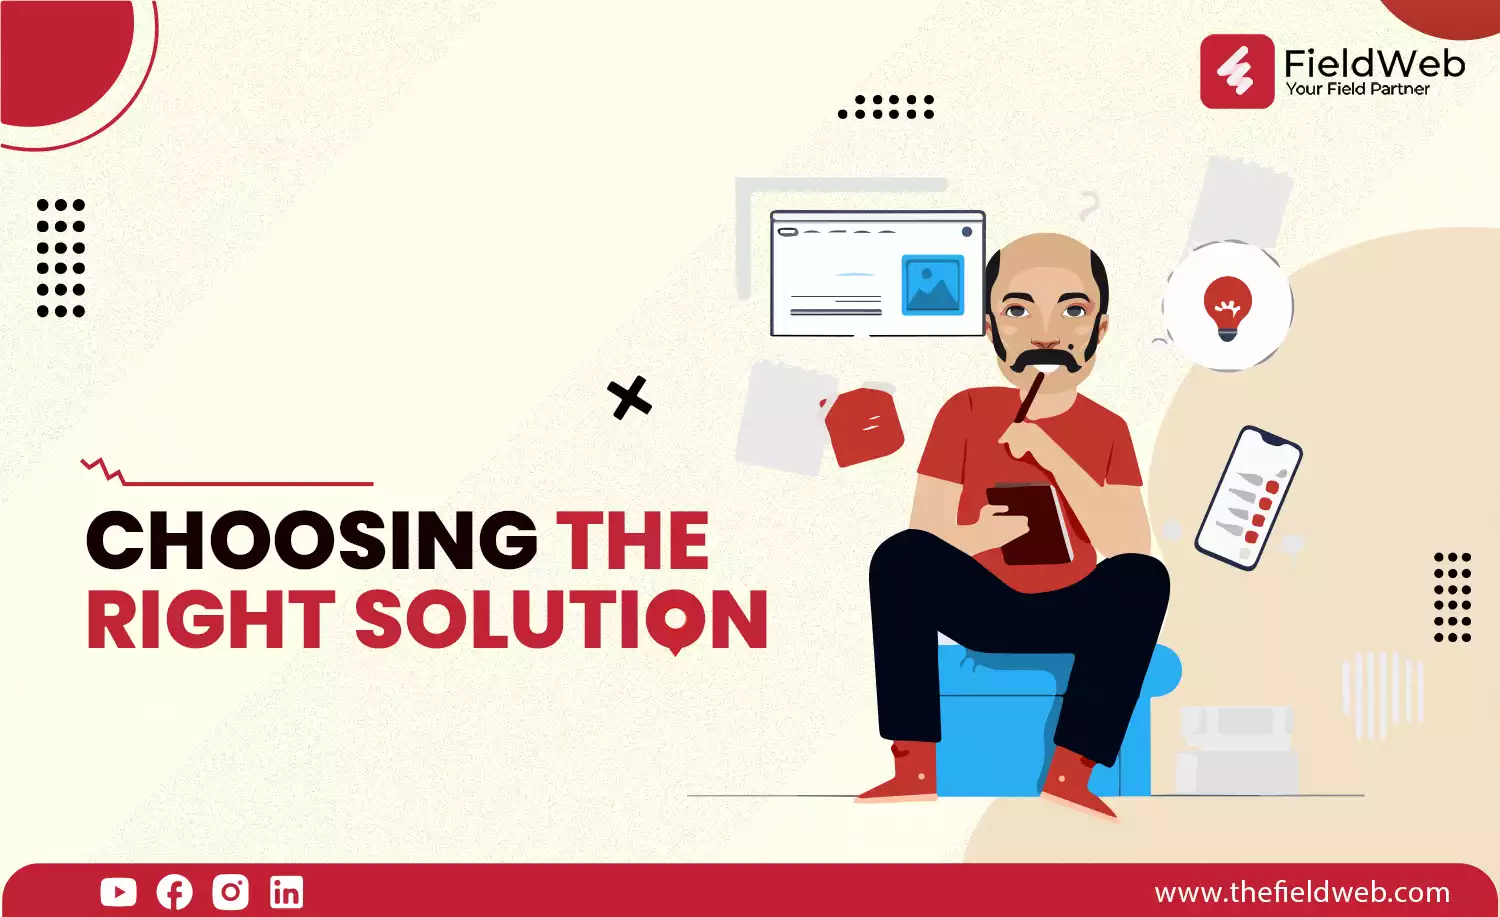 fieldweb mascot wearing red tshirt and thinging to choose the right solution